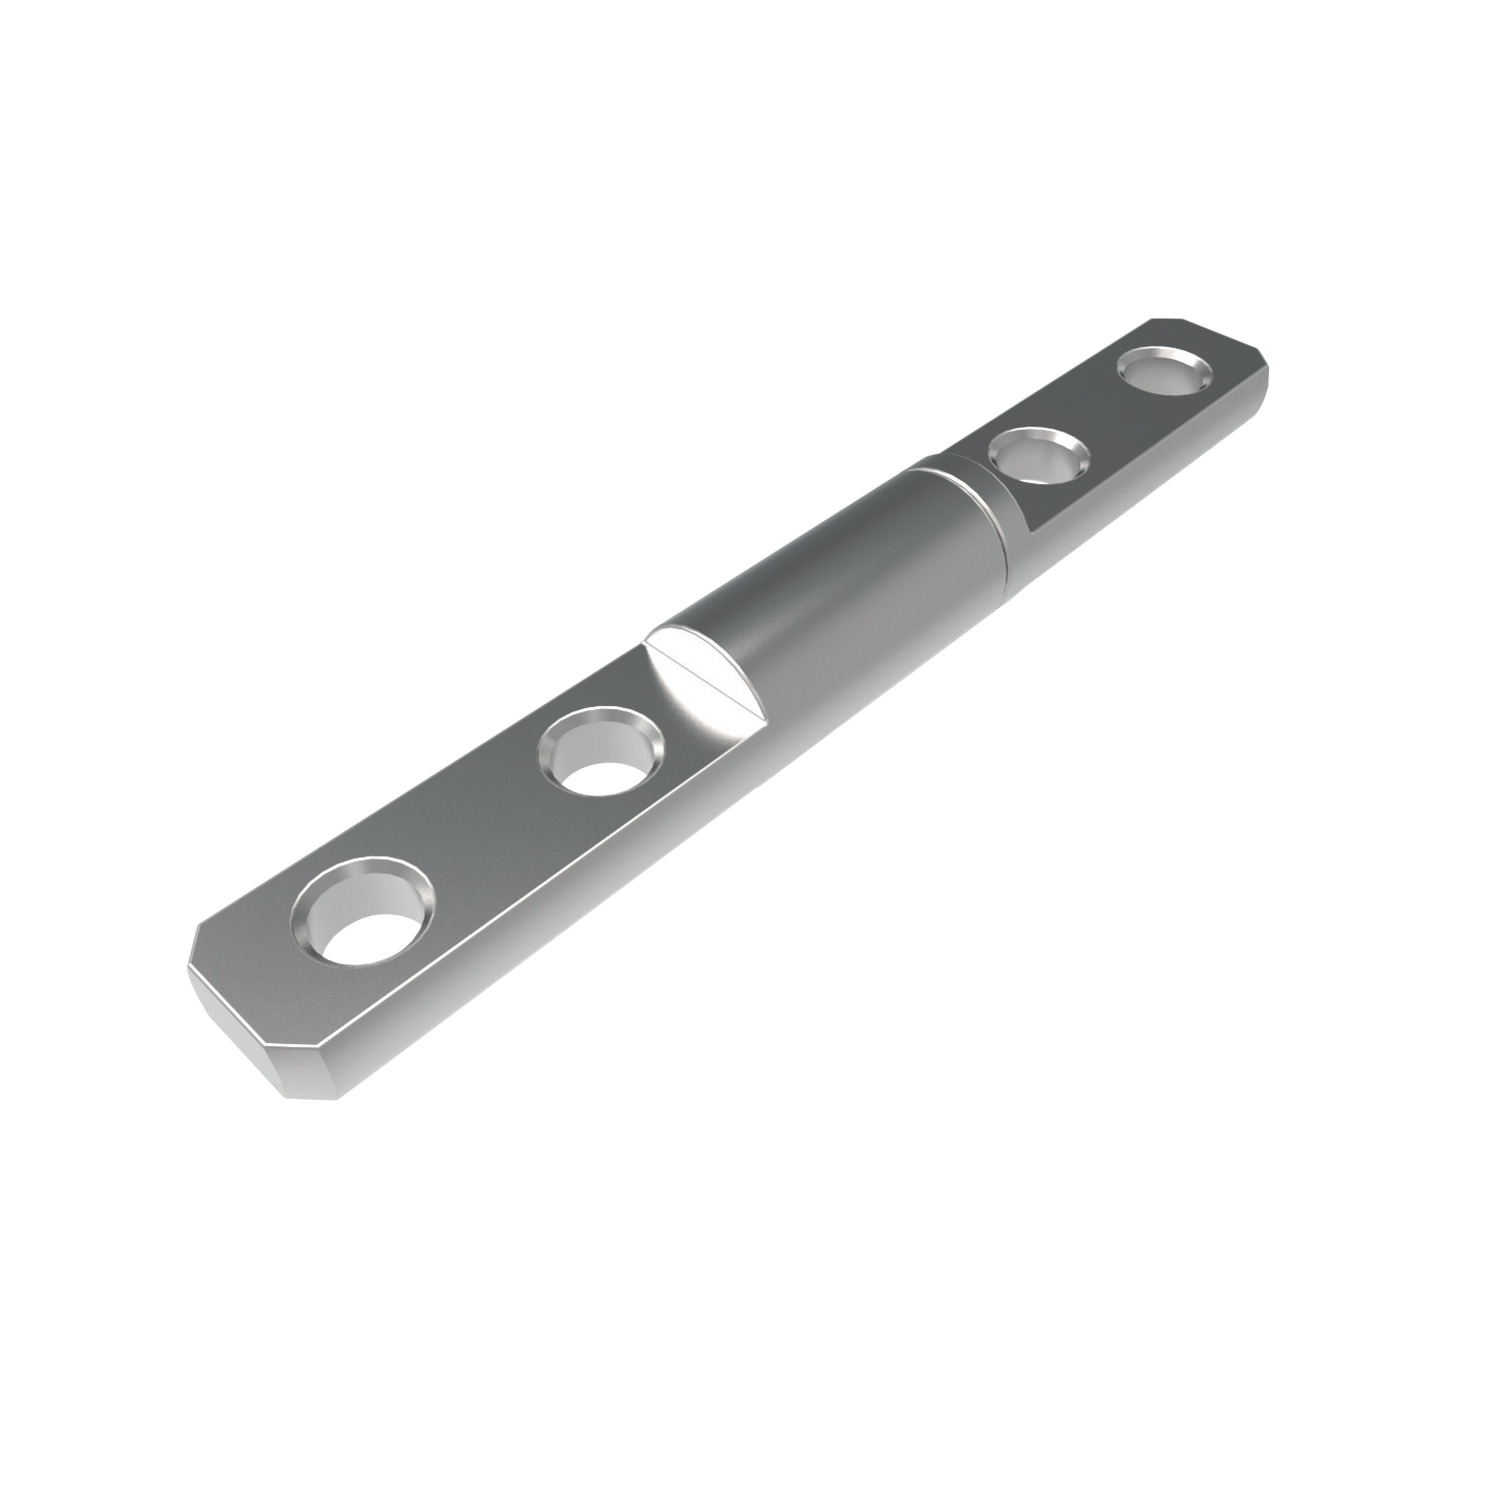 Friction Hinges Symmetric torque friction hinges with a torque of 0,05 to 3,80 Nm.